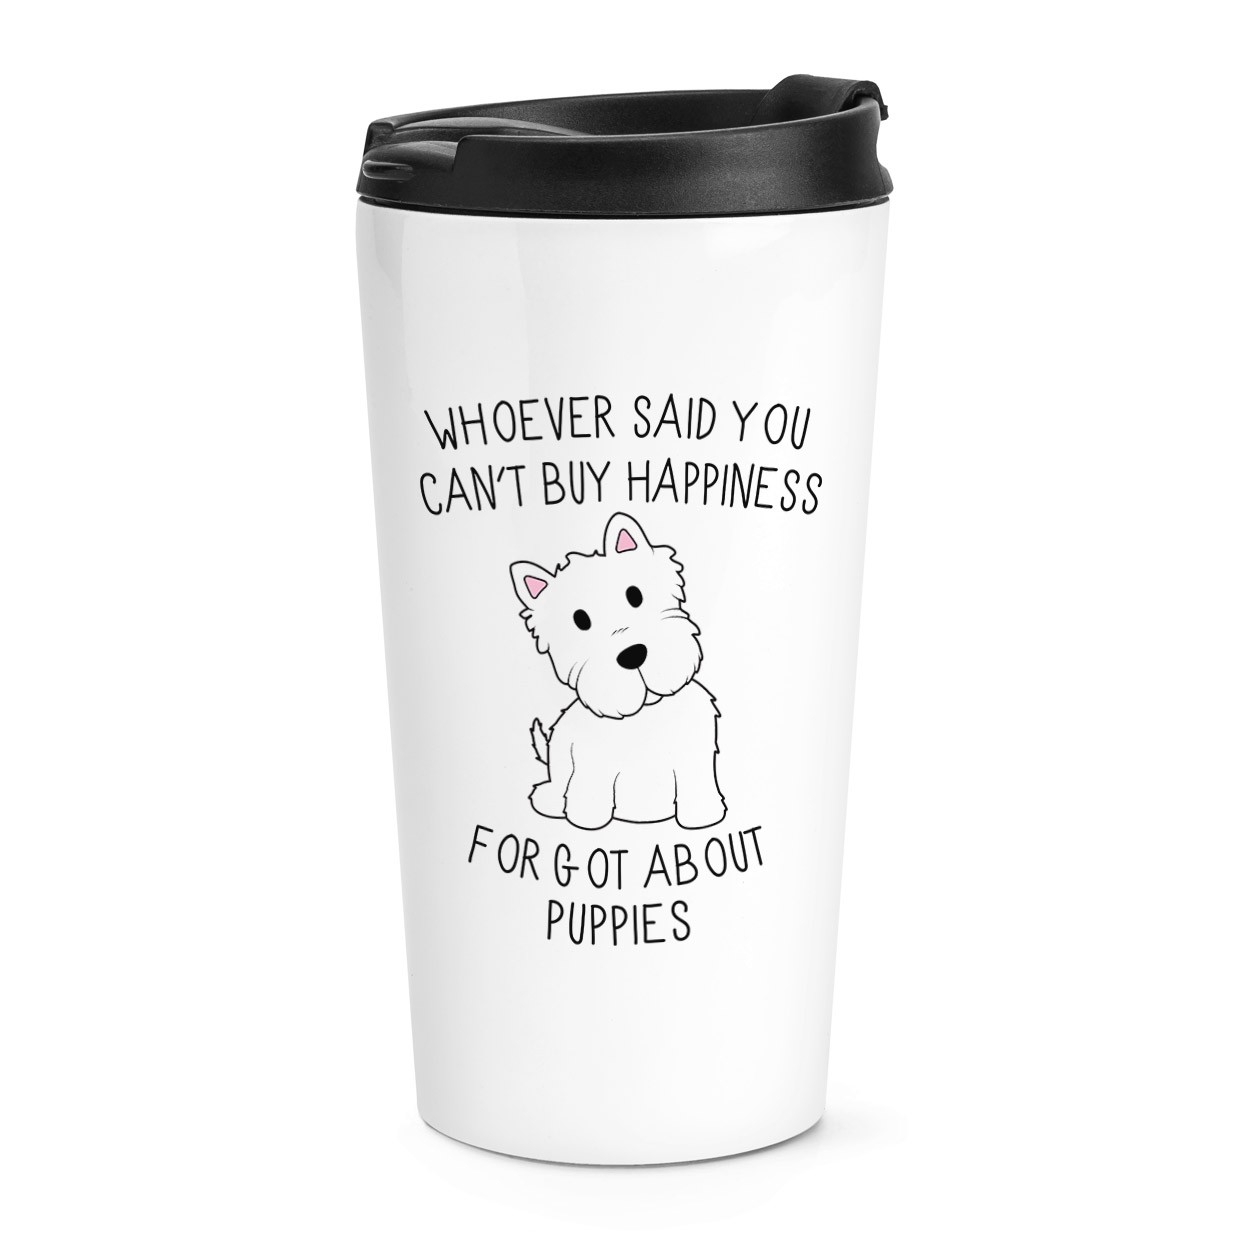 Whoever Said You Can't Buy Happiness Forgot About Puppies Travel Mug Cup